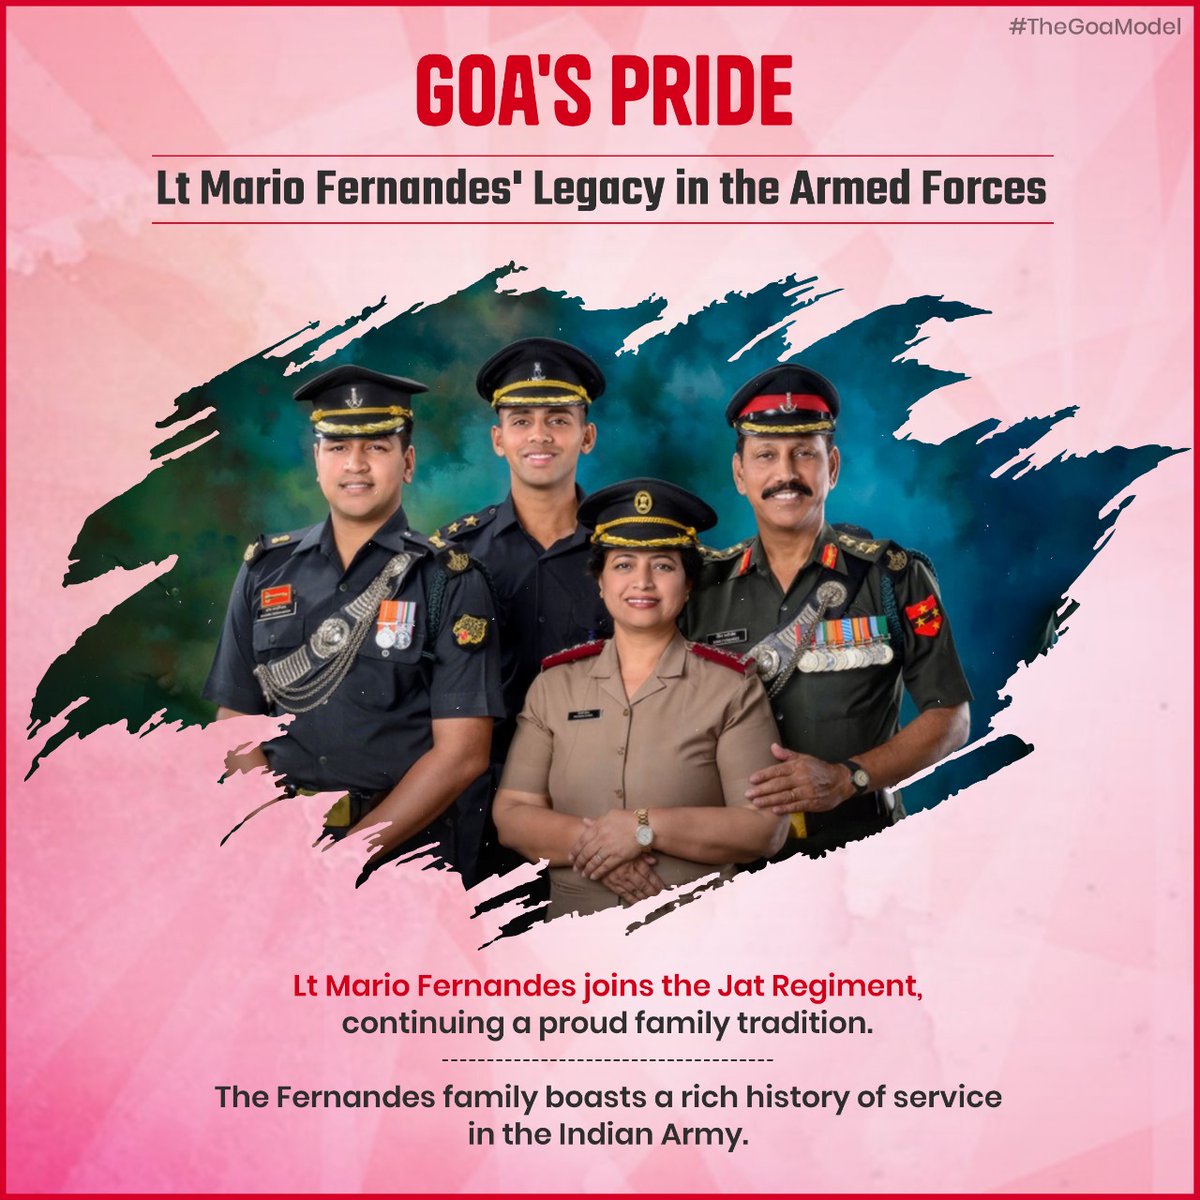 Lt Mario Fernandes, 3rd gen. and 5th member of his family in the Indian Army, embraces the legacy with pride, joining the esteemed Jat Regiment. #GoaPride #MilitaryLegacy #TheGoaModel
#MarioFernandes #IndianArmy #JatRegiment #ProudLegacy #MilitaryService #ArmyPride